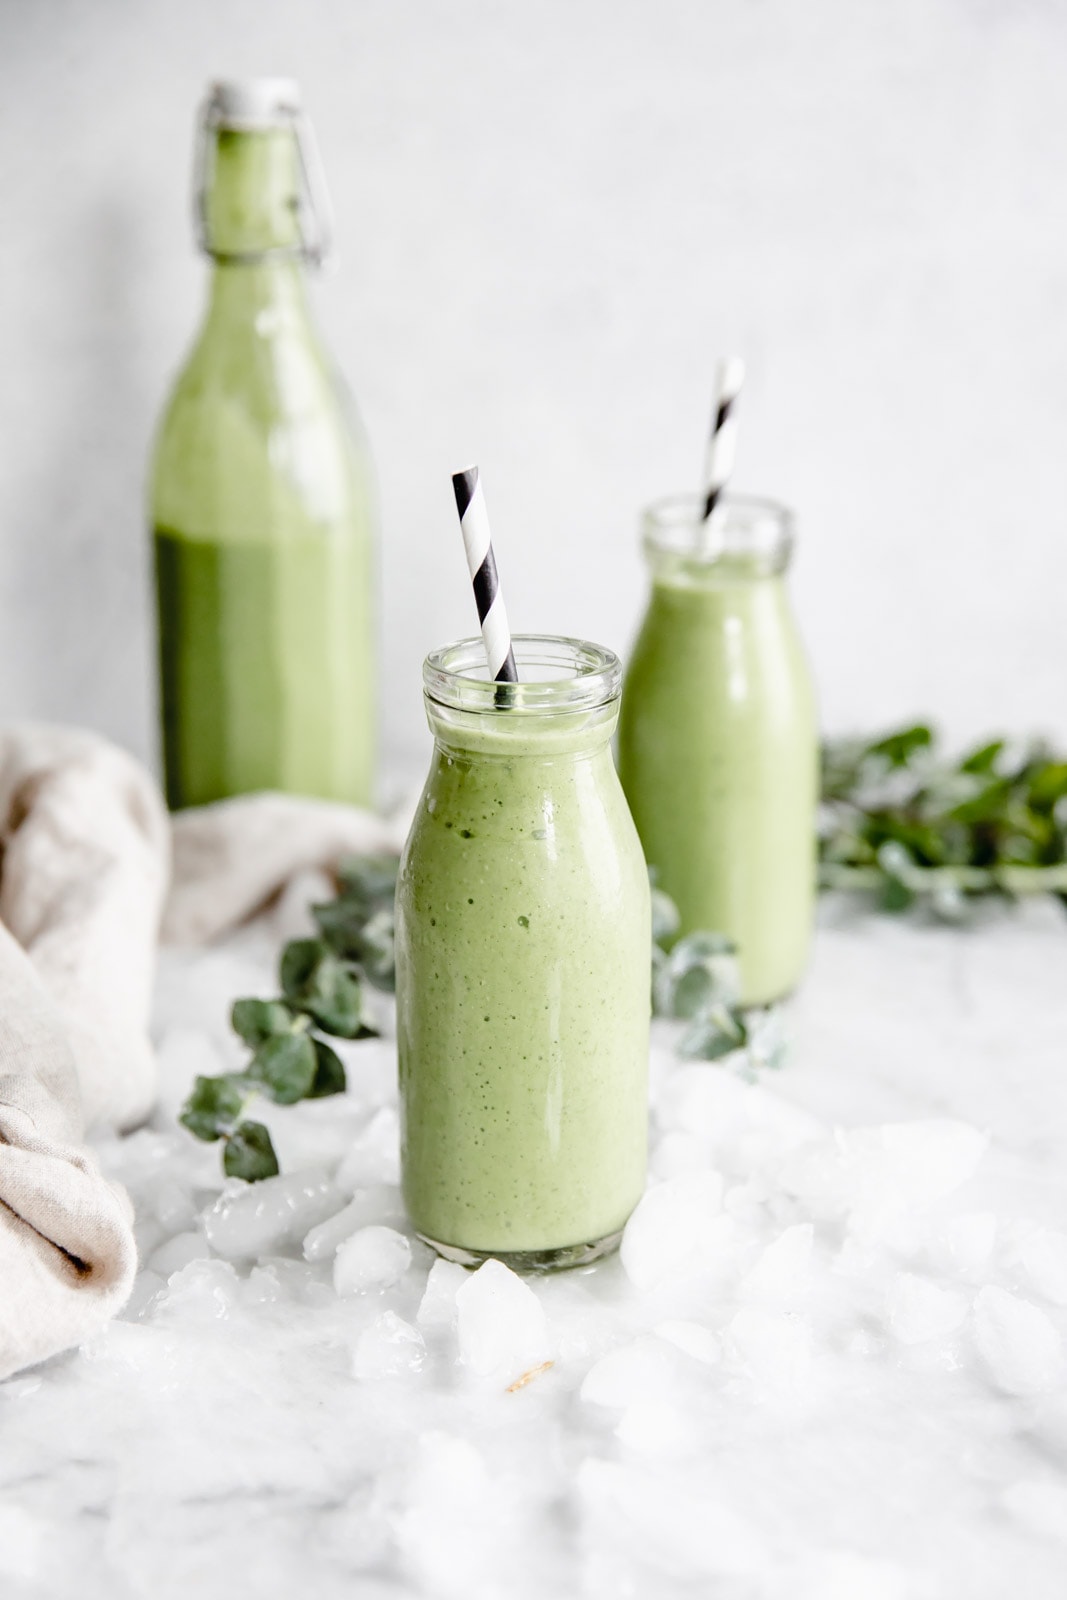 This easy green smoothie recipe tastes good AND is good for you. Start your morning off right with with this protein packed green smoothie.